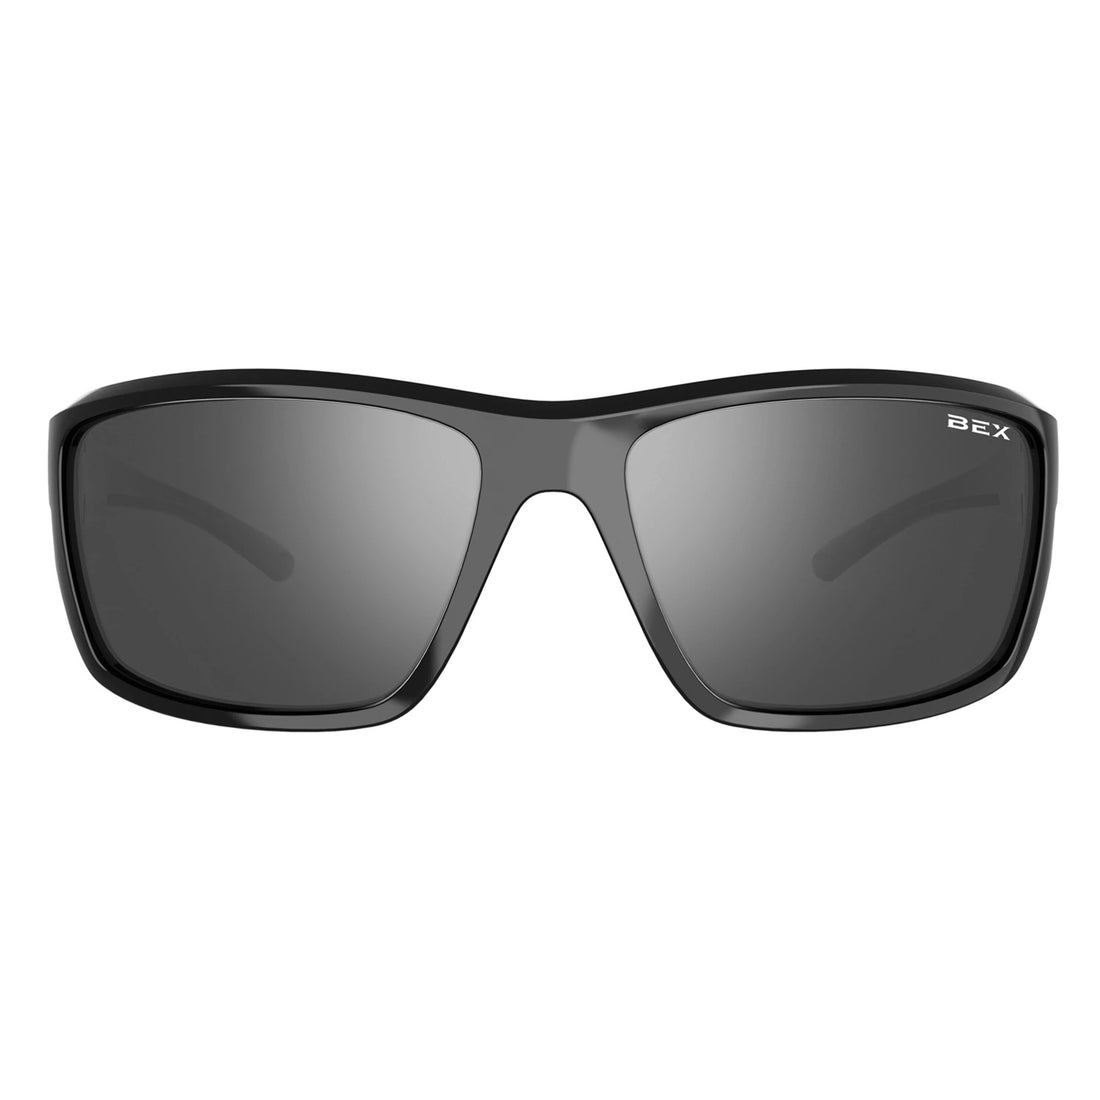 Crevalle in Black/Silver Bex -view of front